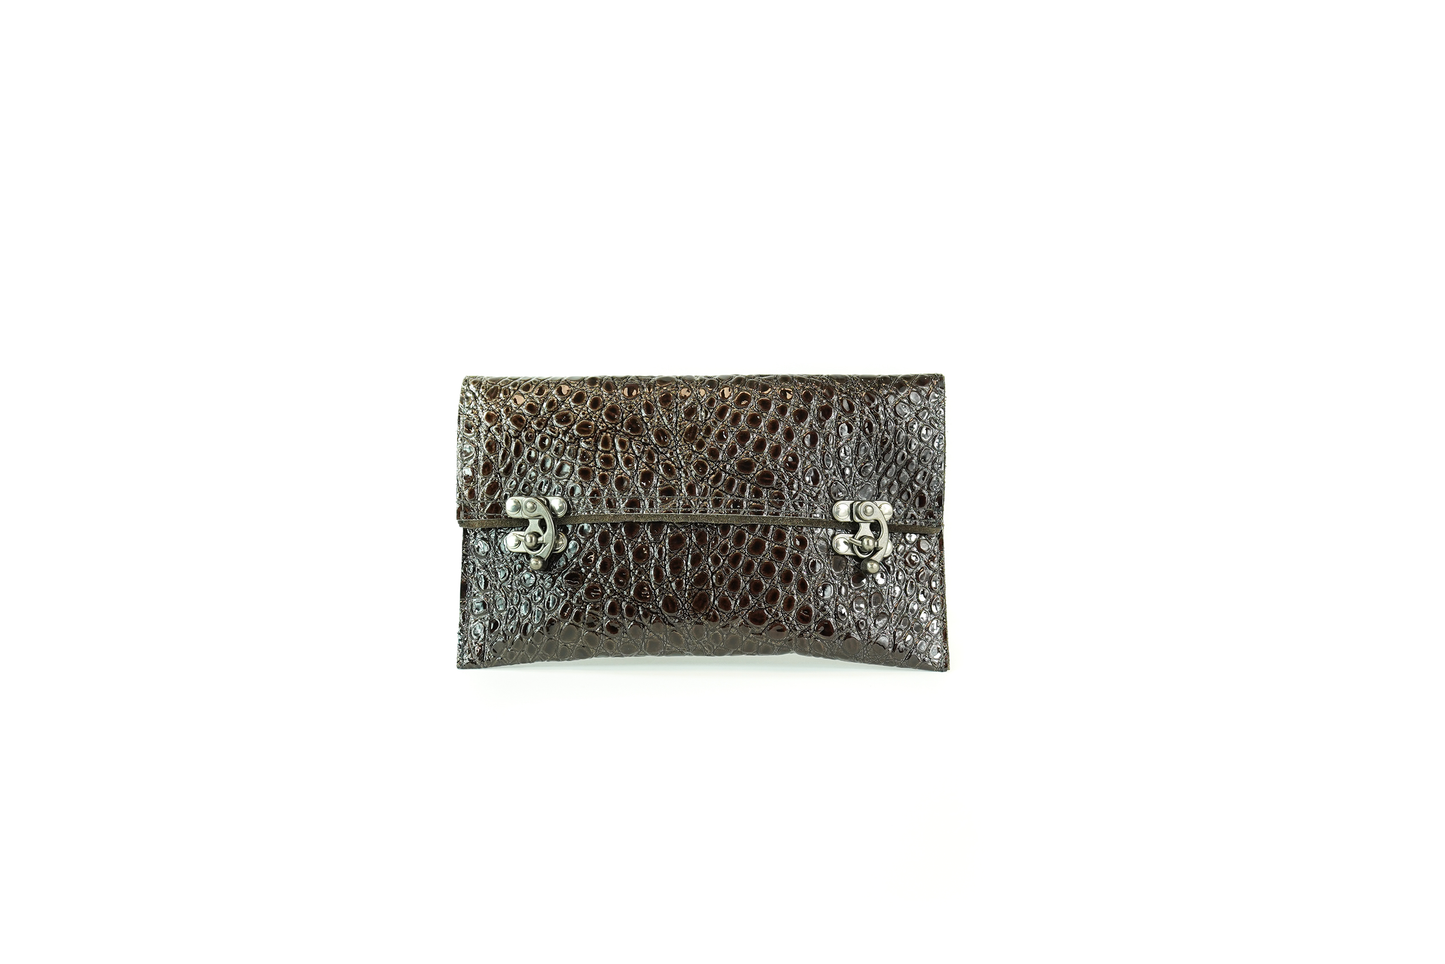 Crocodile Embossed Leather Clutch